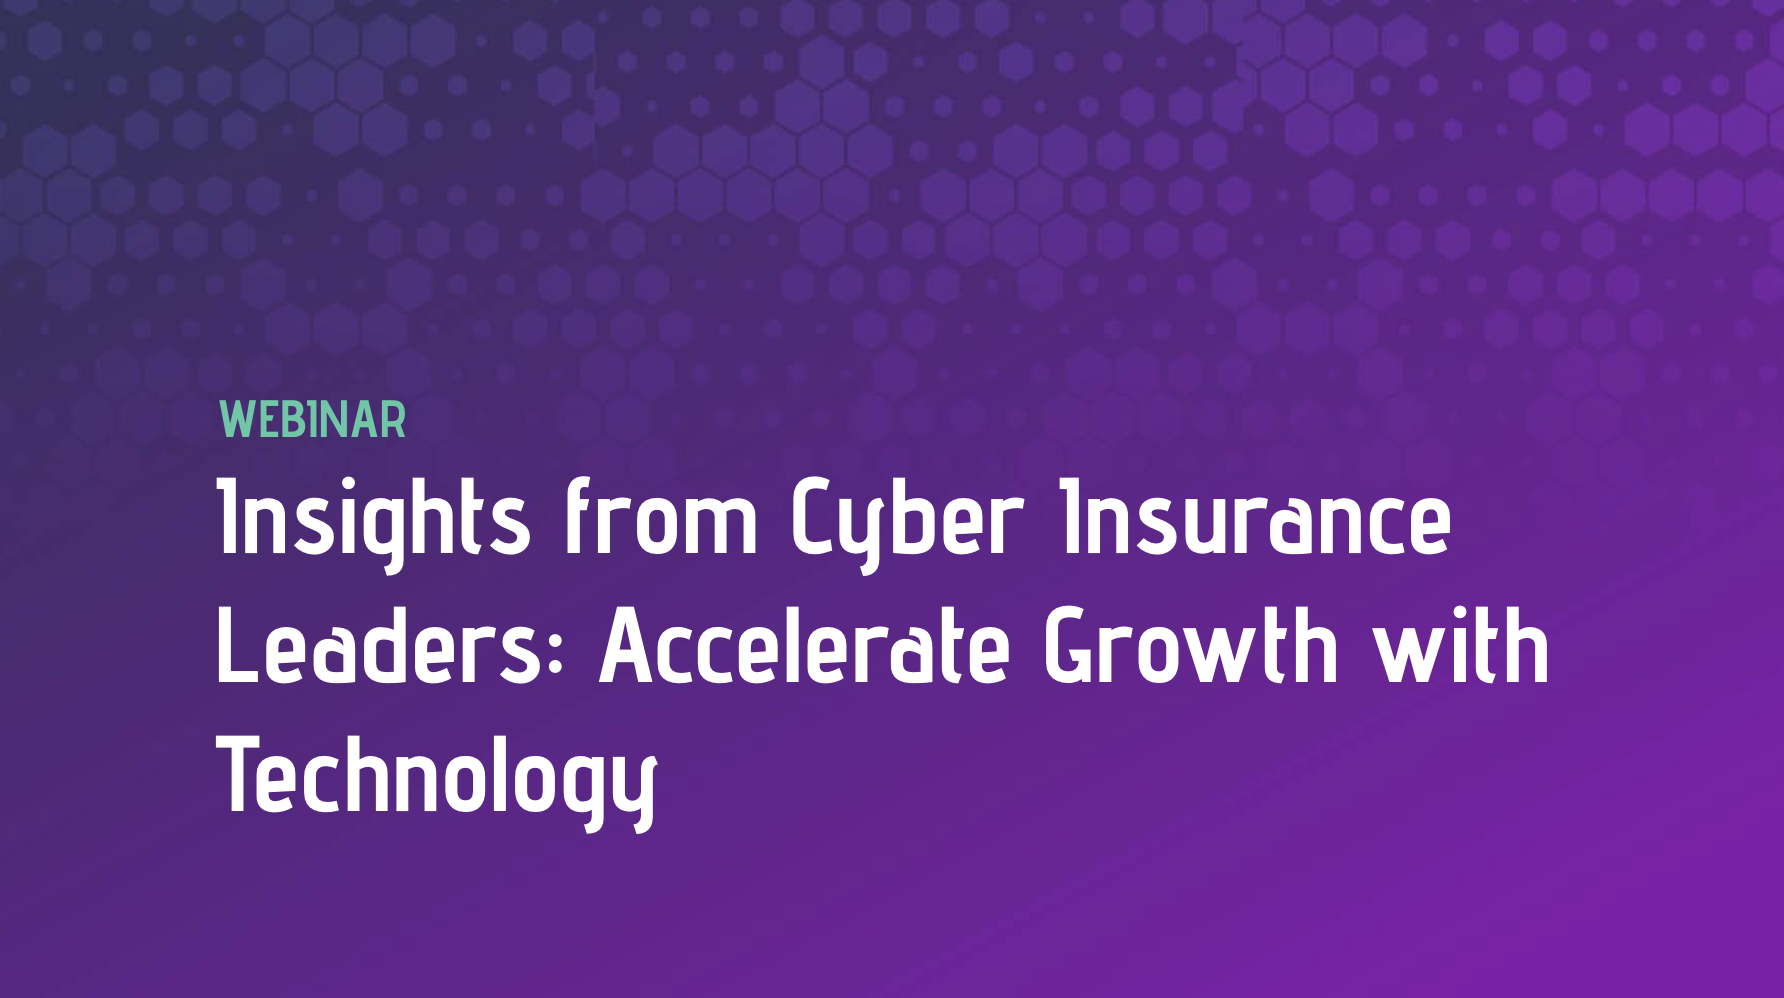 Insights from Cyber Insurance Leaders: Accelerate Growth with Technology